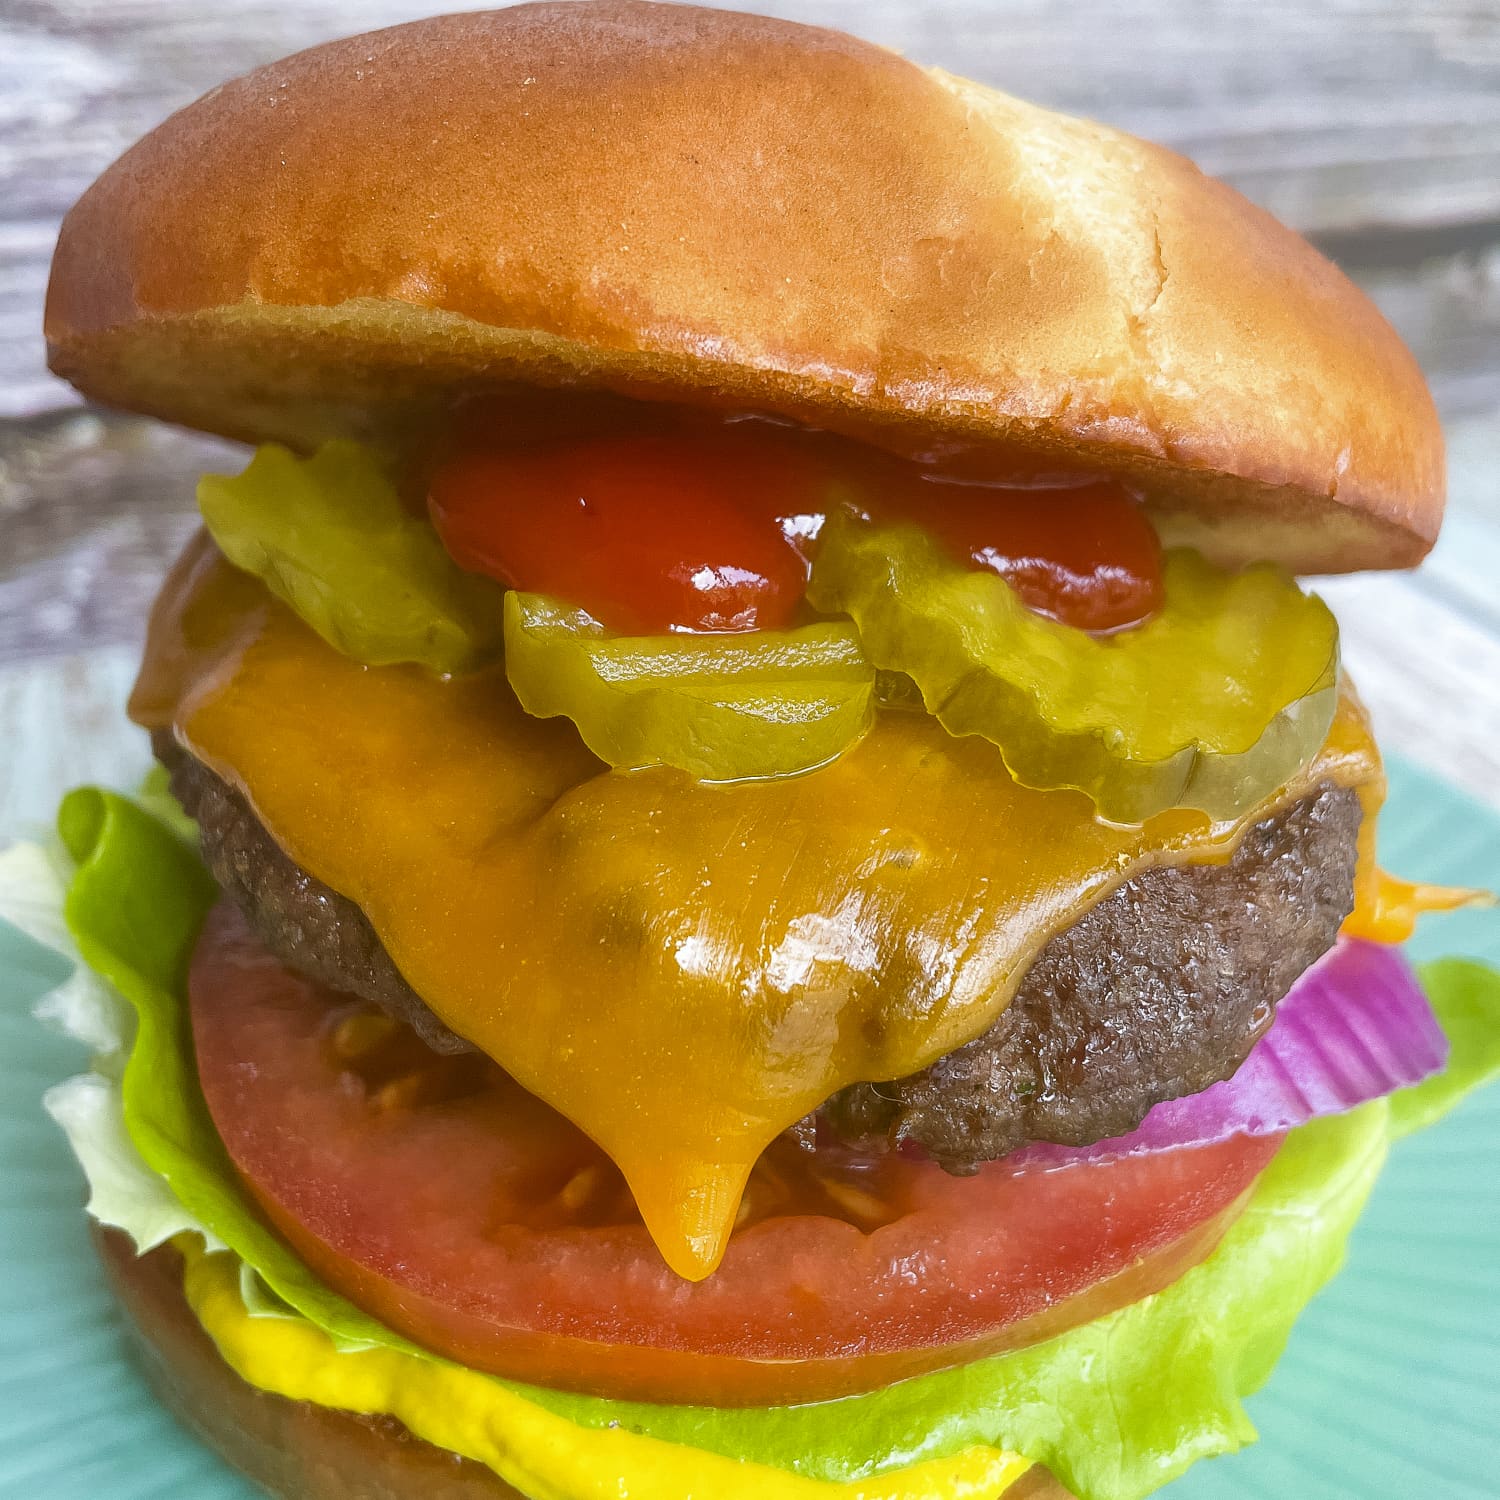 baked hamburger recipe that includes sour cream